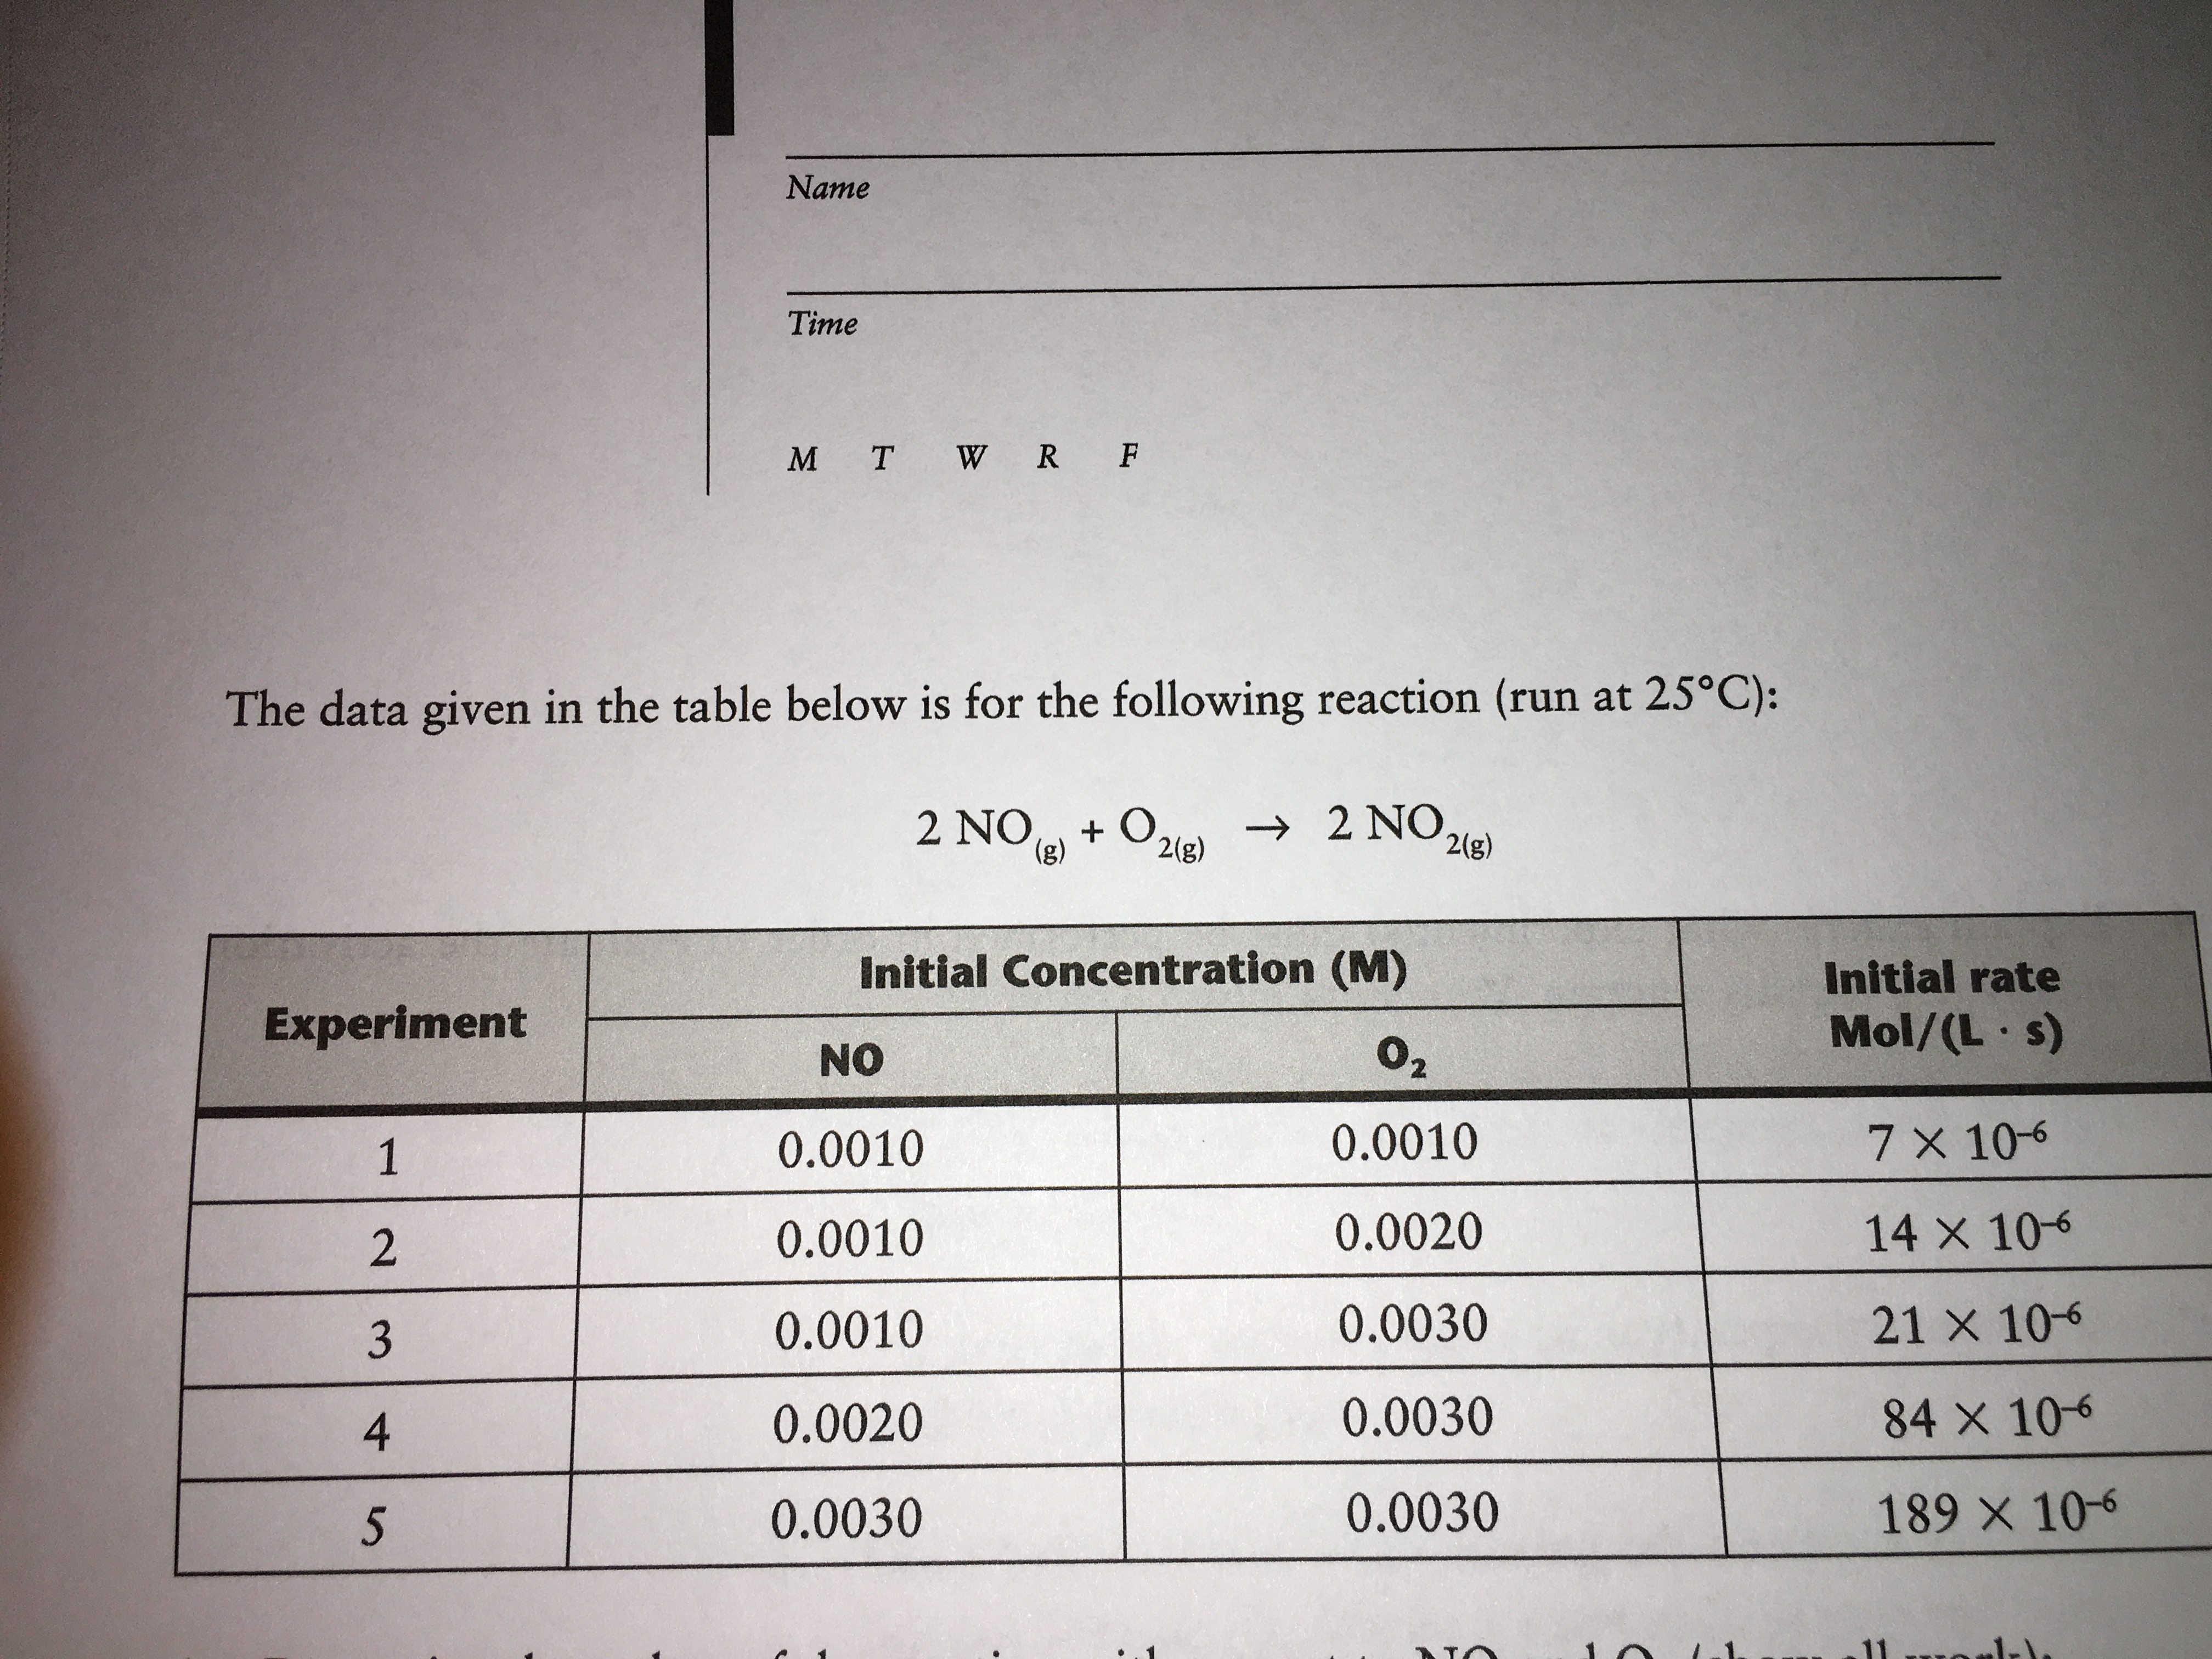 Name
Time
M T W R F
The data given in the table below is for the following reaction (run at 25°C):
2 NOe + O2e) → 2 NO,1e
2(g)
2(g)
(g)
Initial Concentration (M)
Initial rate
Experiment
Mol/(L s)
02
NO
7 x 10-6
0.0010
0.0010
0.0020
14 x 106
0.0010
0.0030
21 X 10-6
0.0010
0.0030
84 X 106
0.0020
4
189 X 10-6
0.0030
0.0030
2.
